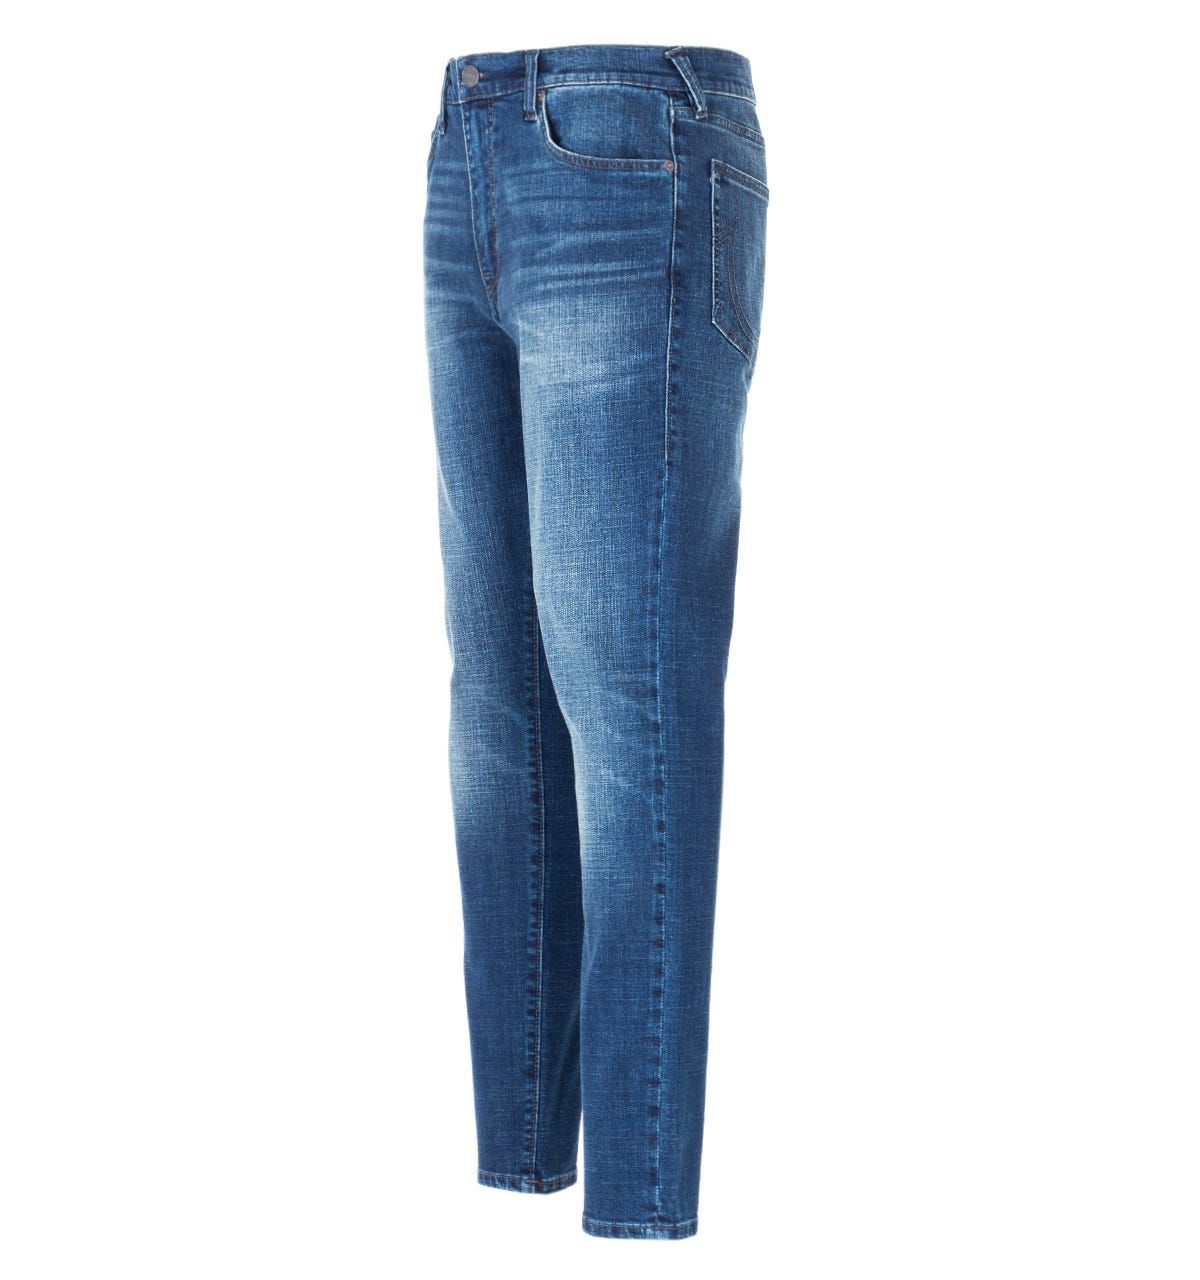 <p>True Religion are global denim experts who have redesigned and reinvented the traditional five pocket jean for the modern man. Founded in L.A. back in 2002 and quickly became known for quality craftsmanship, bold design and the iconic lucky horseshoe logo. The Mick Slouchy Skinny Fit Jeans are the perfect addition to refresh your jeans collection this season.</p><ul><li>Slouchy Skinny Fit - Slim Tapered Fit in the Leg with a Relaxed Fit Up Top</li><li>Cotton Blend Composition</li><li>Five-Pocket Design</li><li>Fading & 3D Whiskering Detailing</li><li>Signature Gold Stitching</li><li>True Religion Branding</li></ul><p>Style & Fit:</p><ul><li>Slouchy Skinny Fit</li><li>Fits True to Size</li></ul><p>Composition & Care:</p><ul><li>98% Cotton</li><li>2% Elastane</li><li>Machine Wash</li></ul>